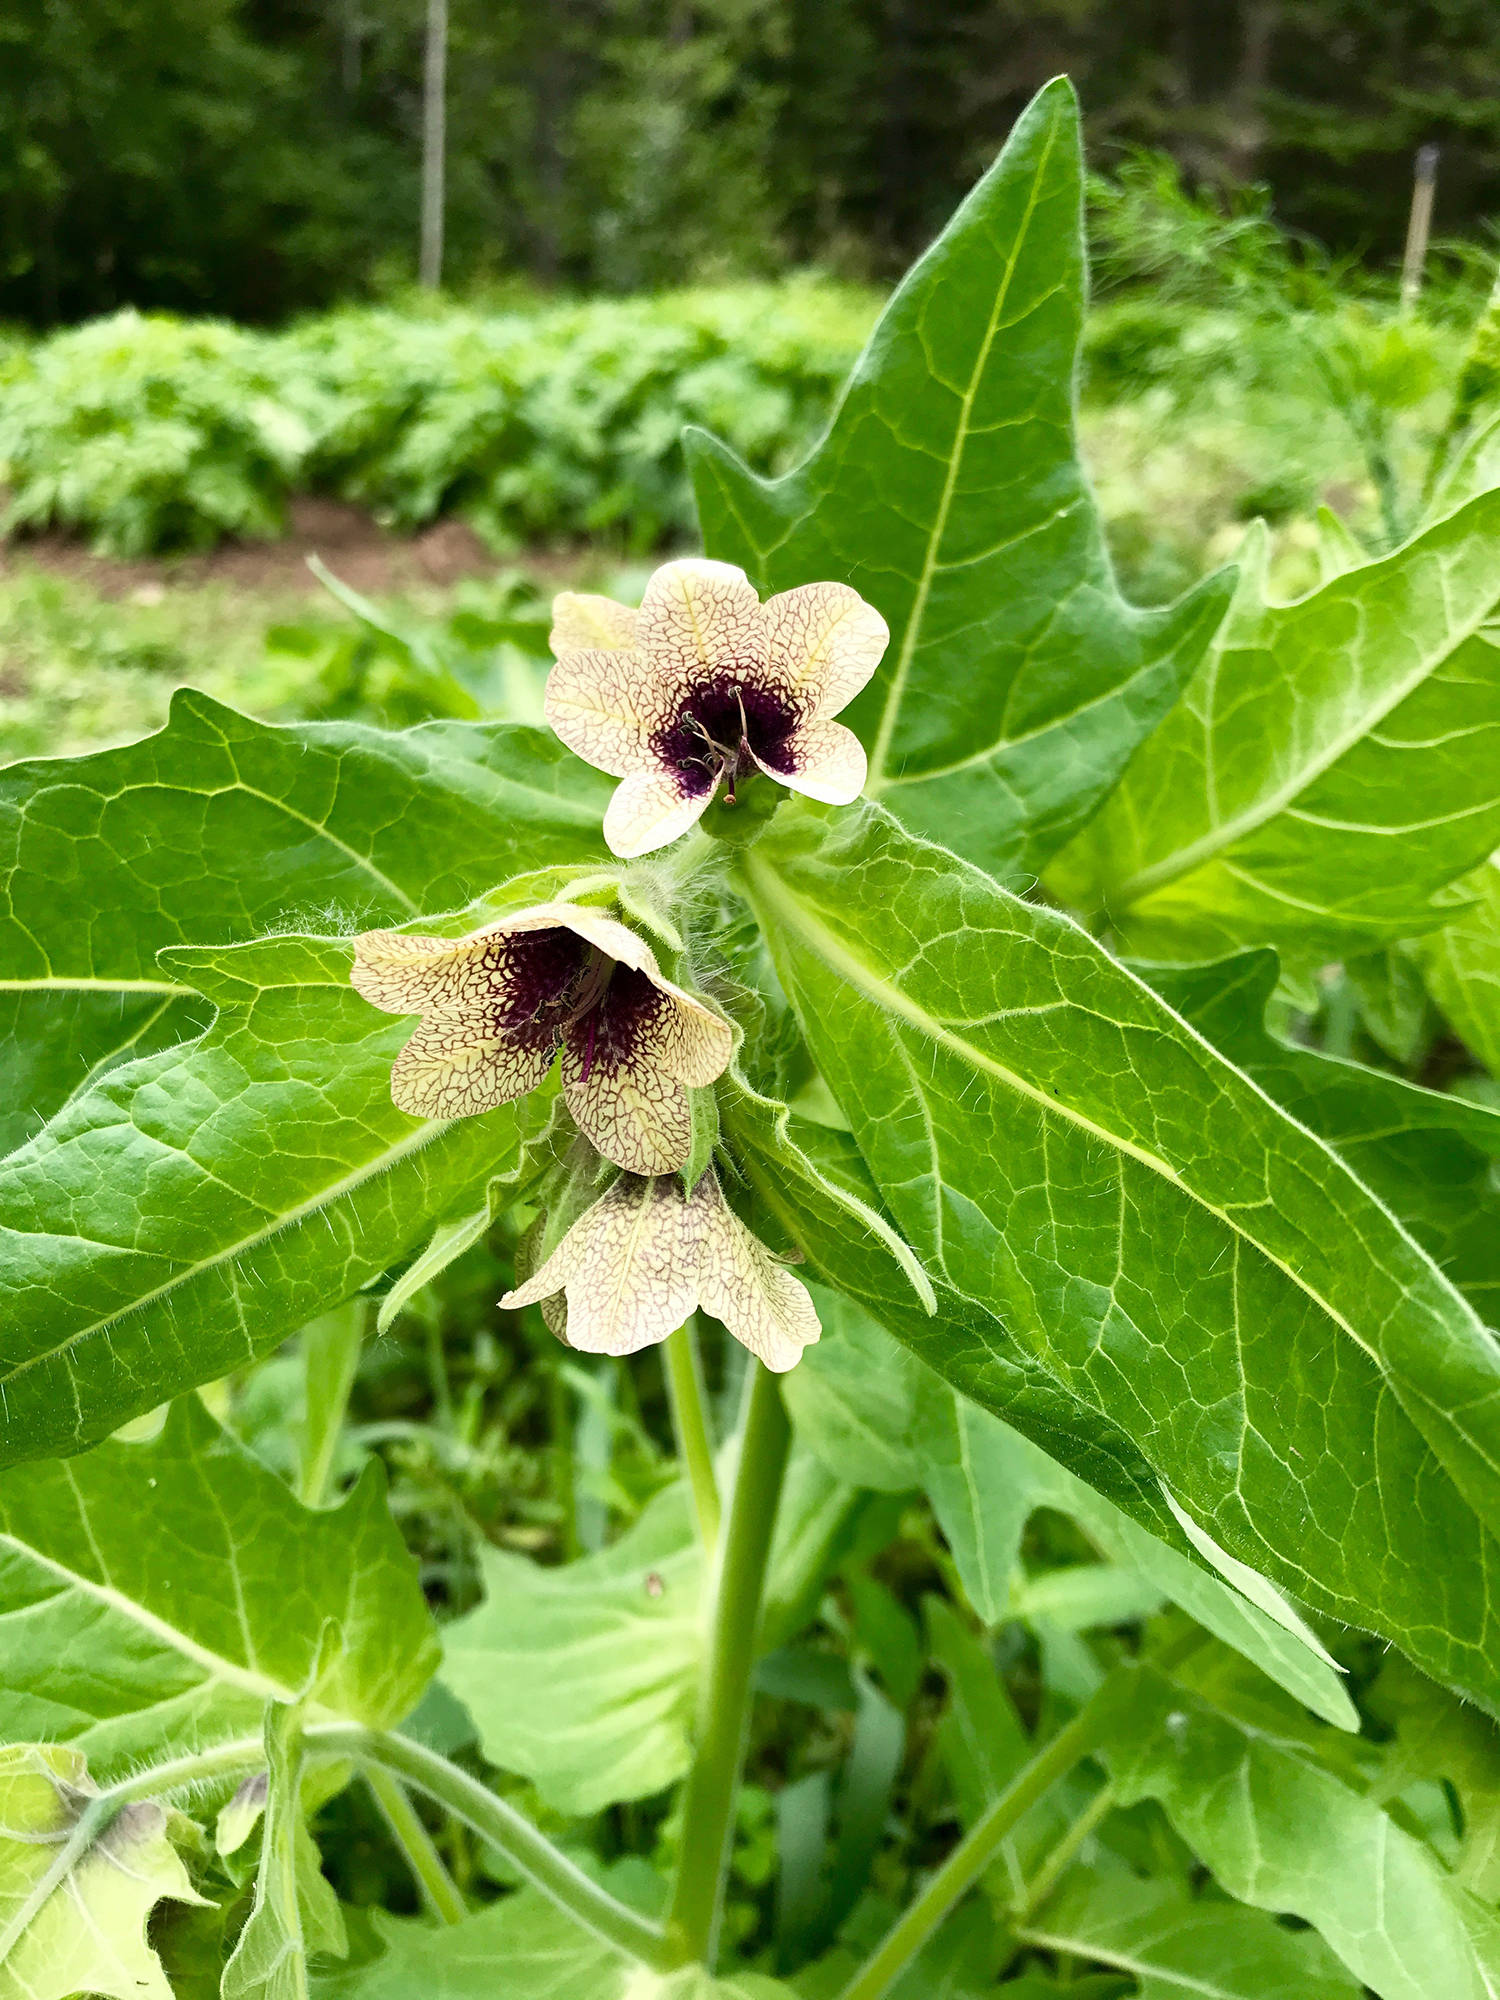 Jim Cooperman recently found a specimen of black henbane, also called stinking nightshade, growing on his North Shuswap property. The invasive species has only been found in five locations in British Columbia. (Jim Cooperman photo)